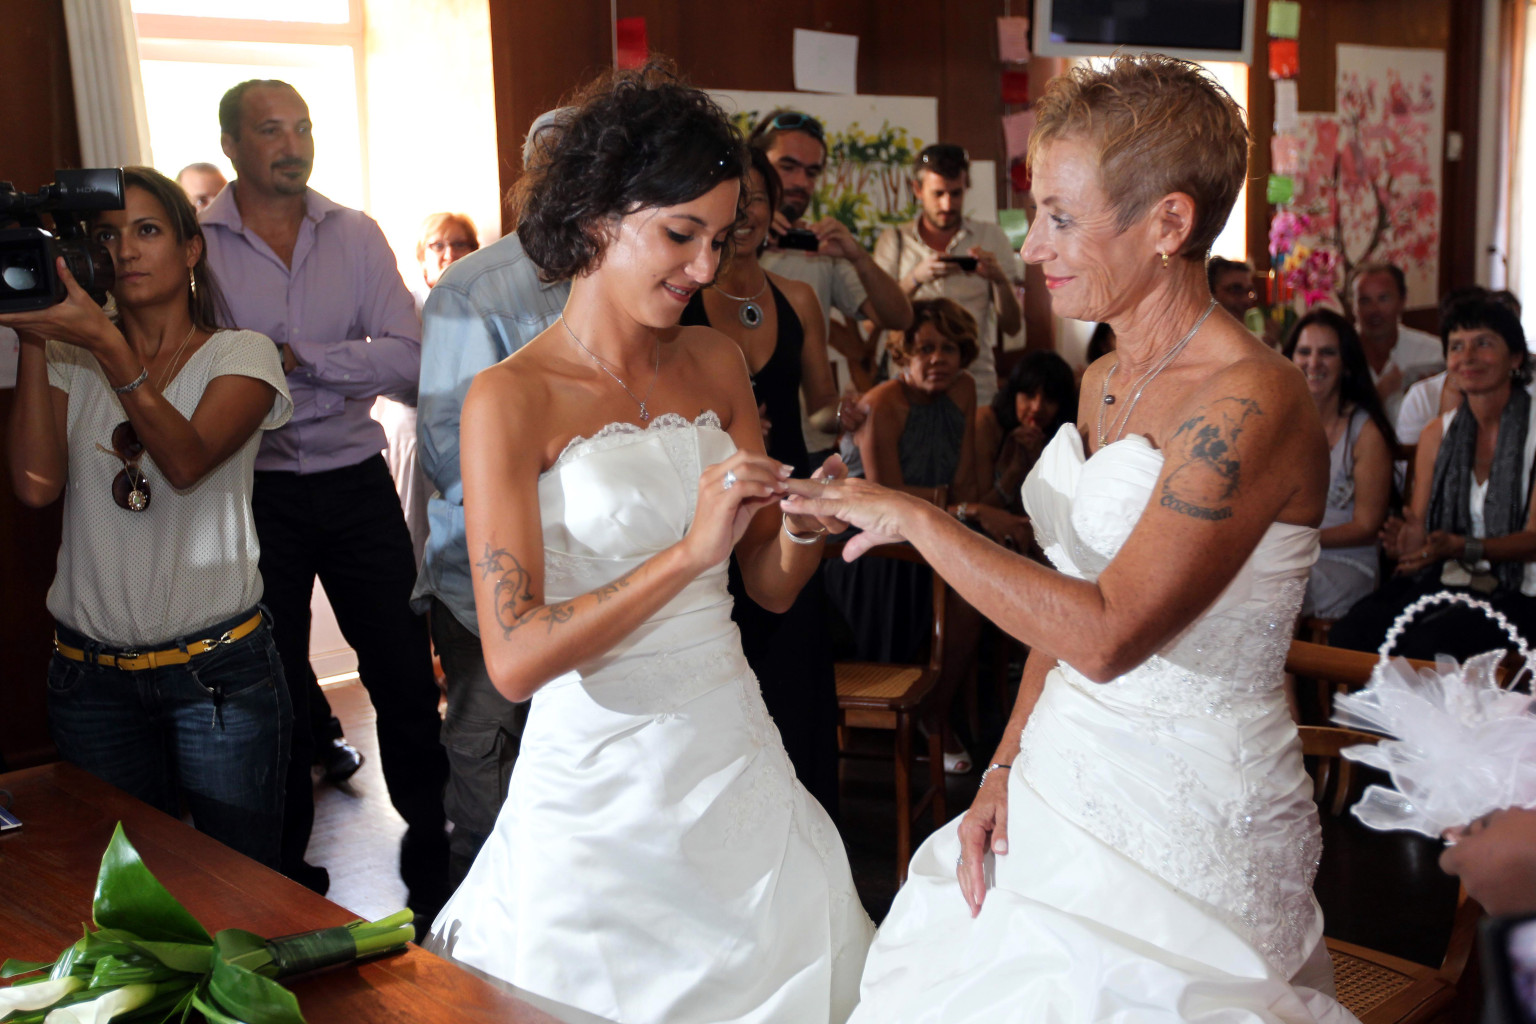 Free Gay Marriage Ceremonies Being Offered By City Of West Hollywood